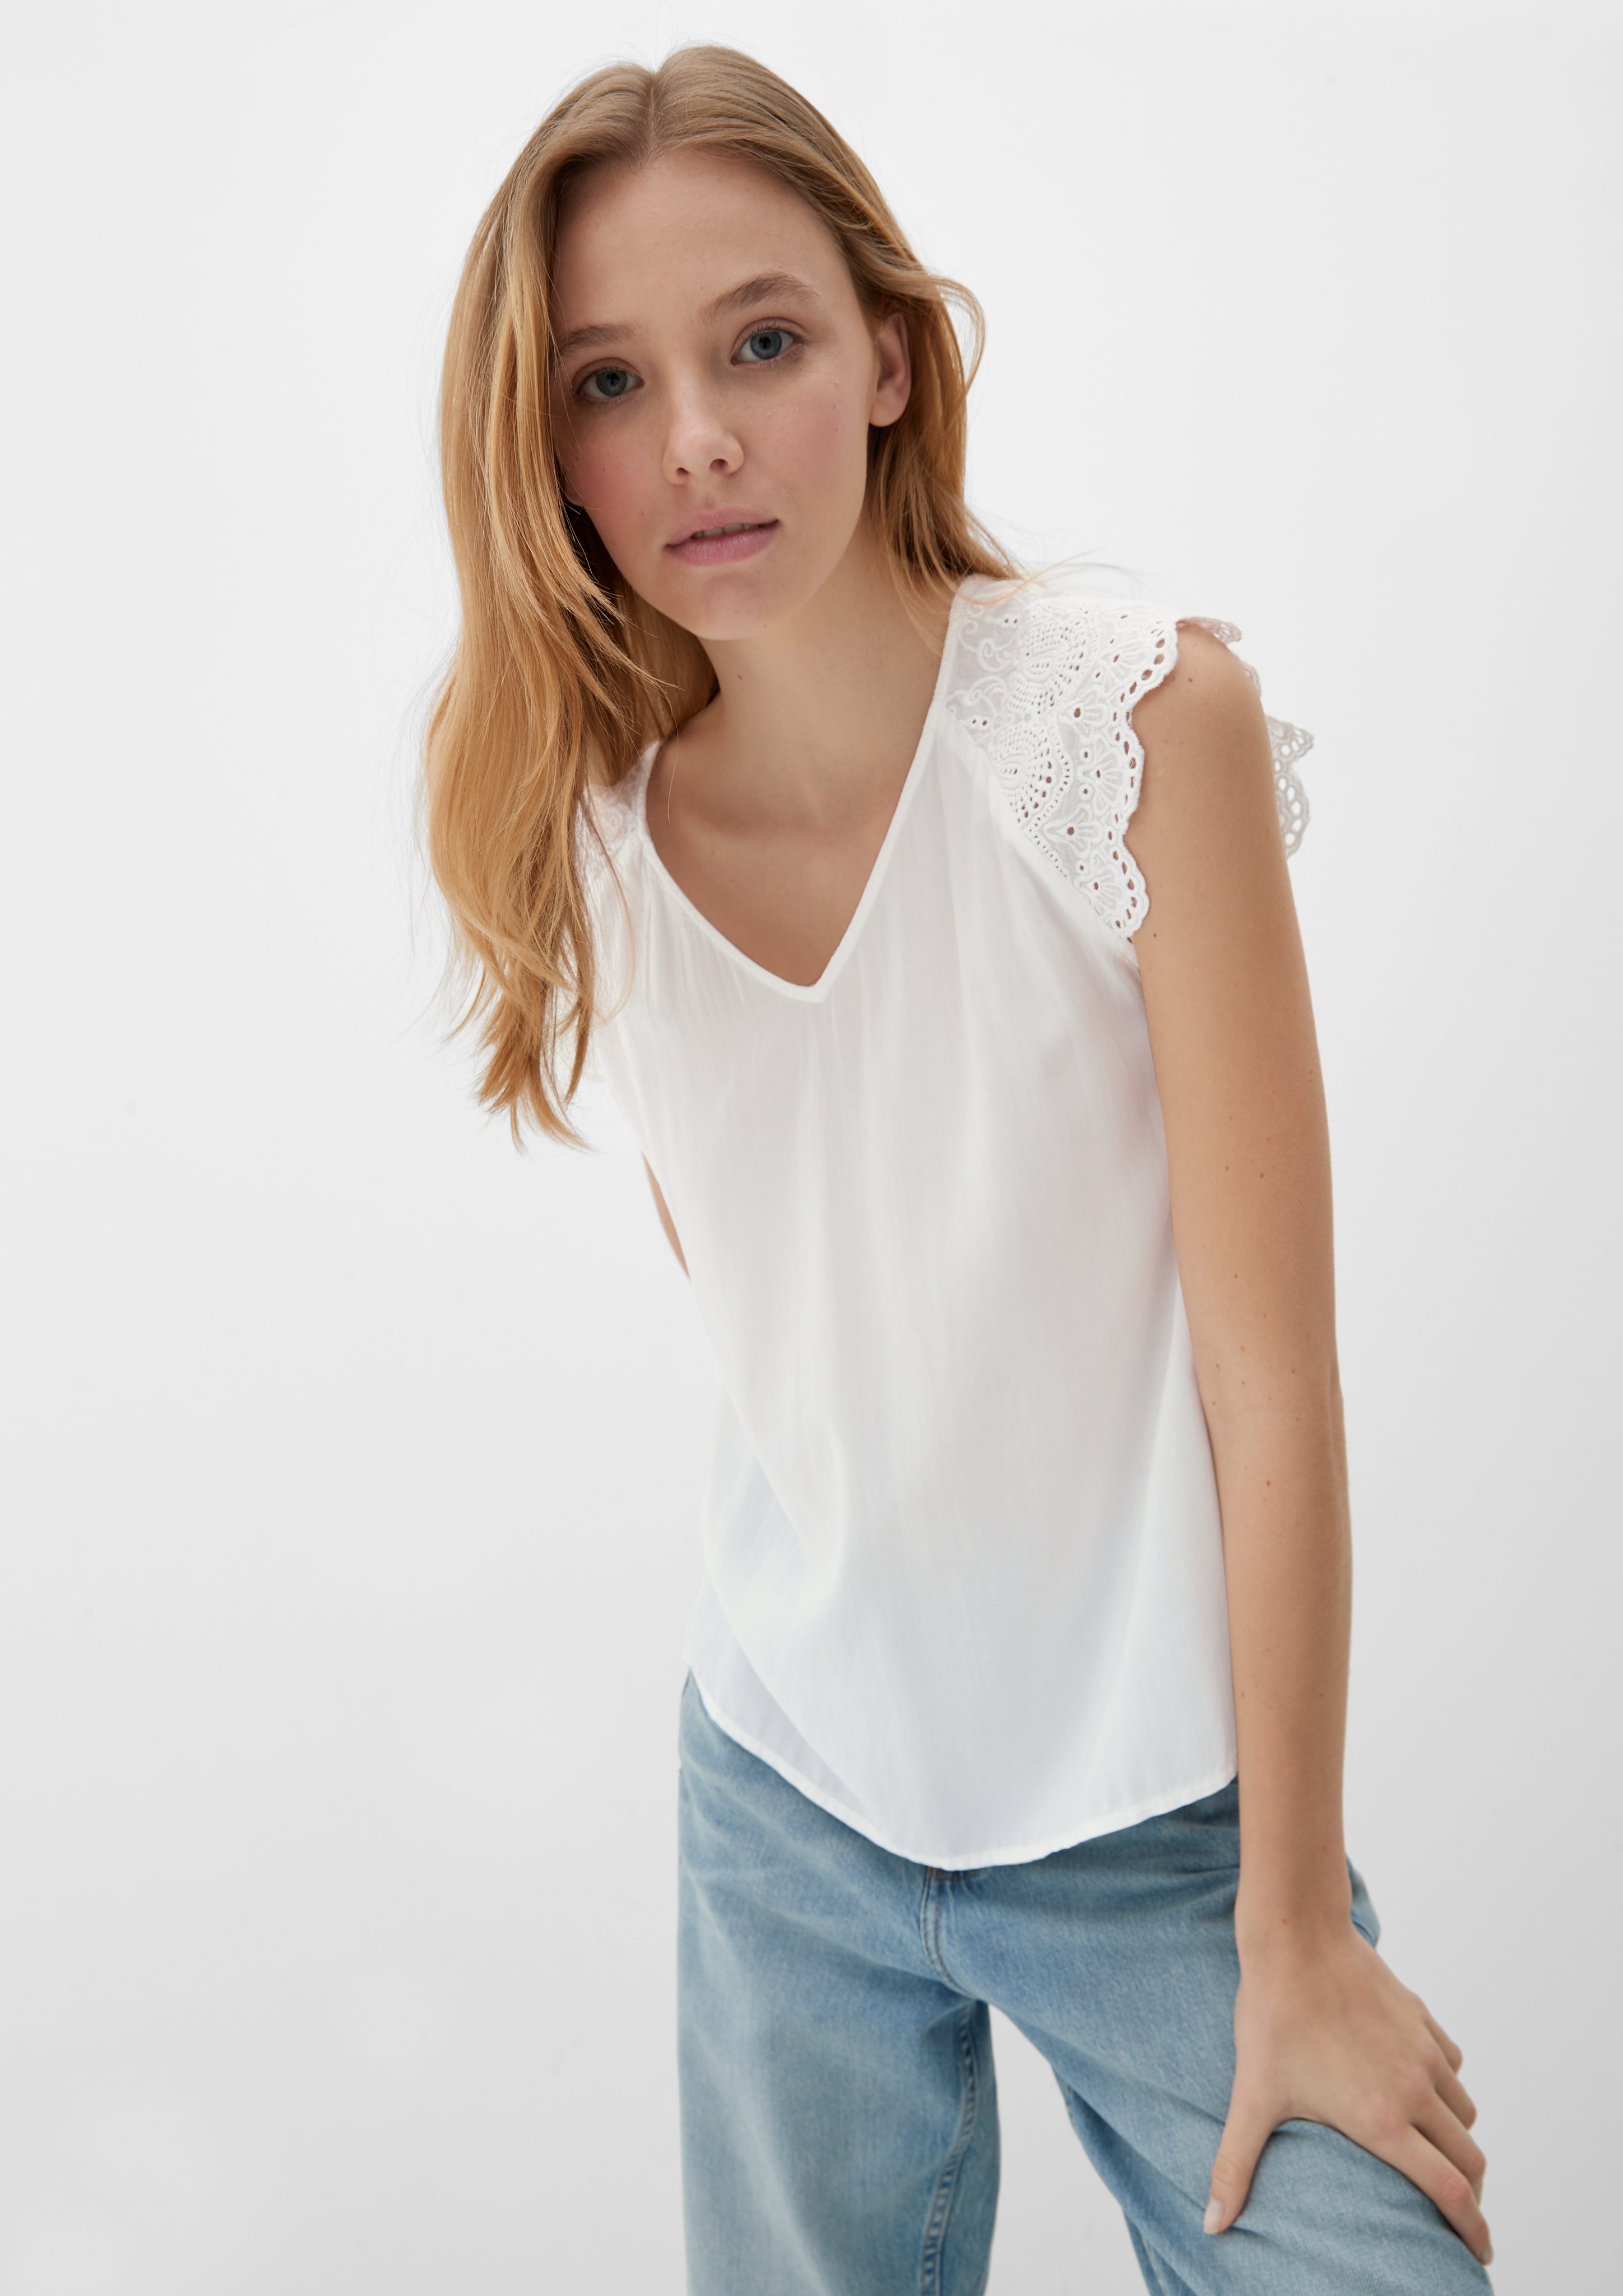 Broderie mit ecru Bluse Anglaise QS Blusentop